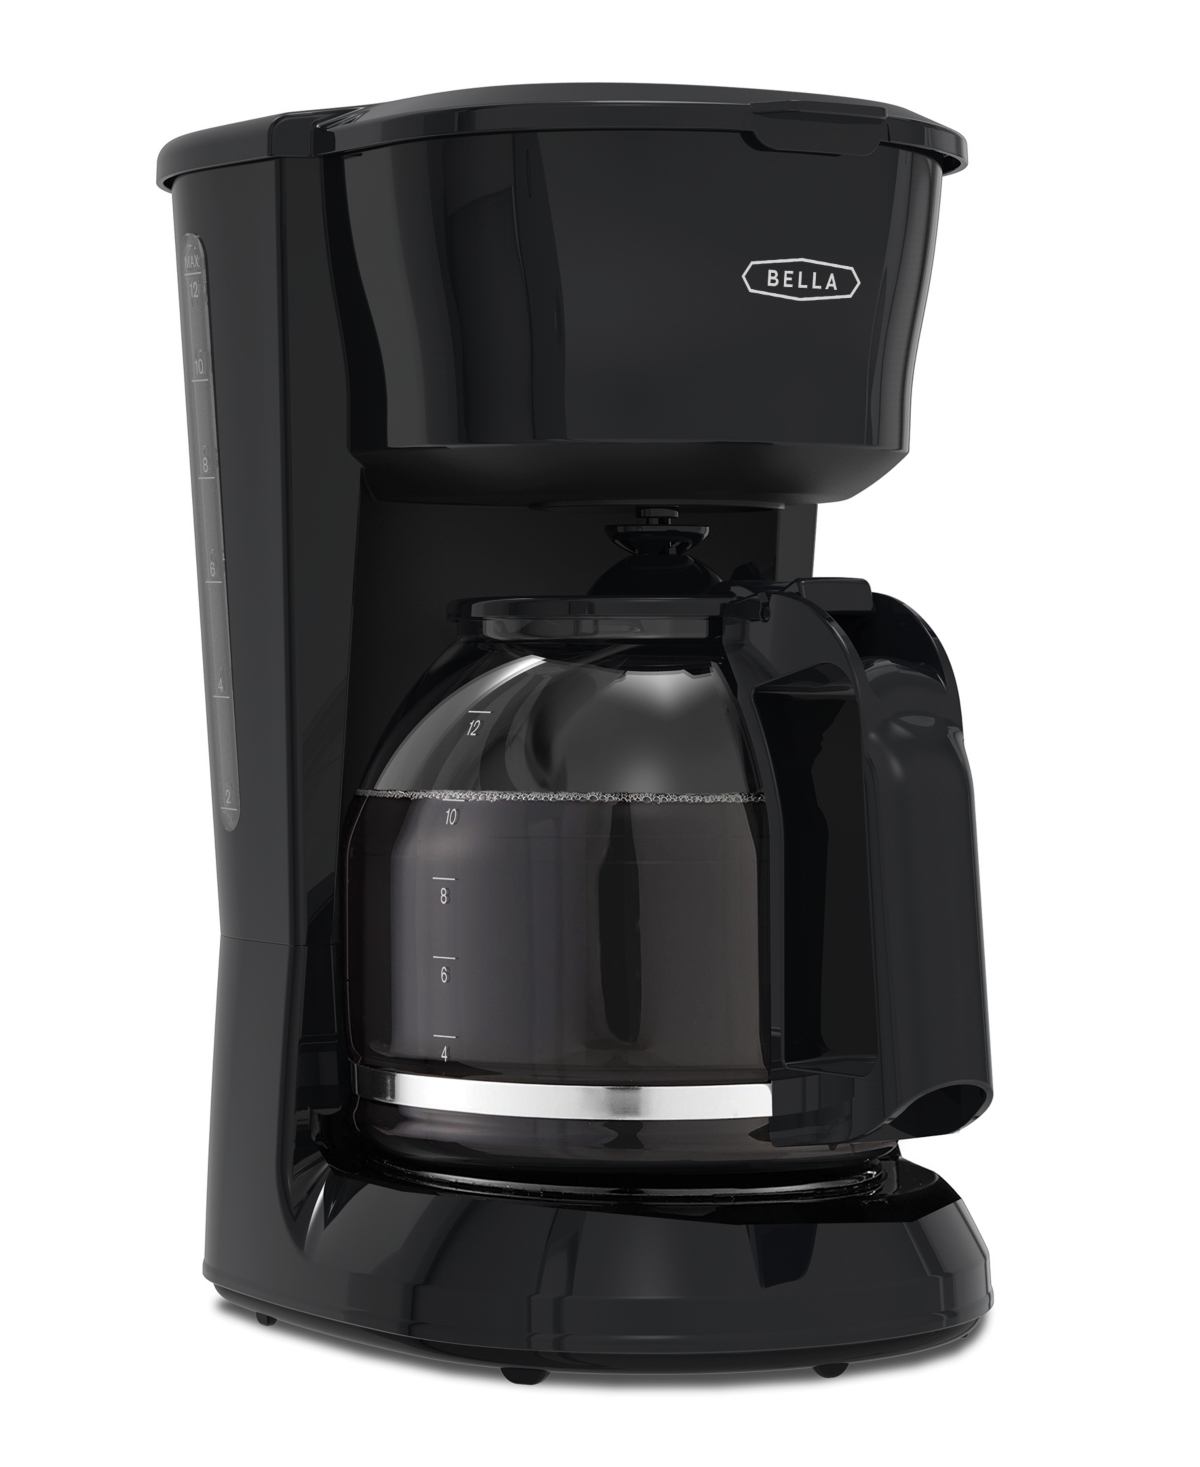 12-Cup Bella Glass-Carafe Black Drip Coffee Maker (Black) $15.93 + Free Store Pickup at Macy's or Free Shipping on $25+